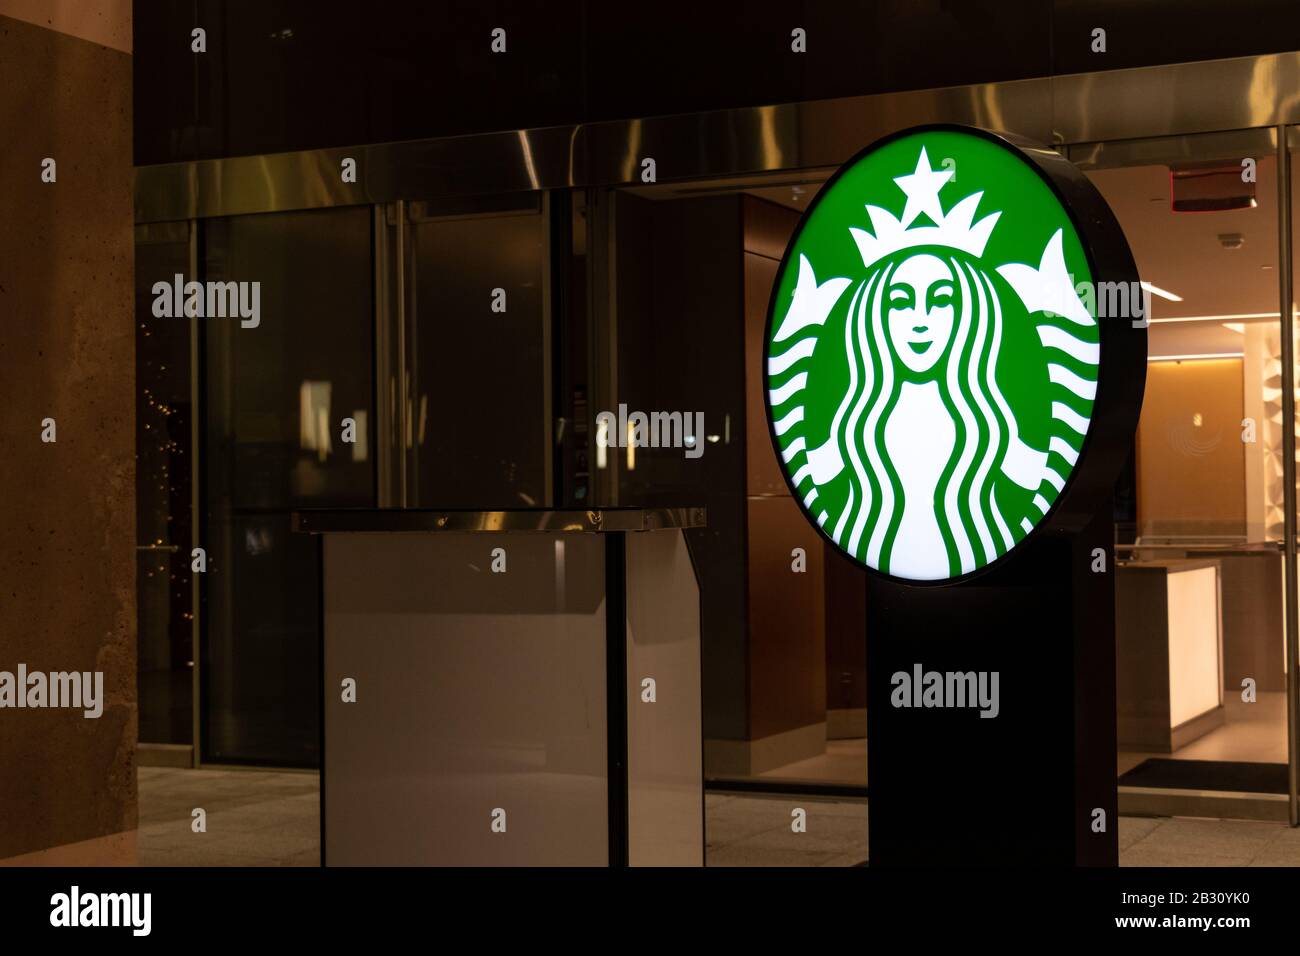 Starbucks Coffee logo lit up out night out-front of a coffee shop inside a hotel. Stock Photo